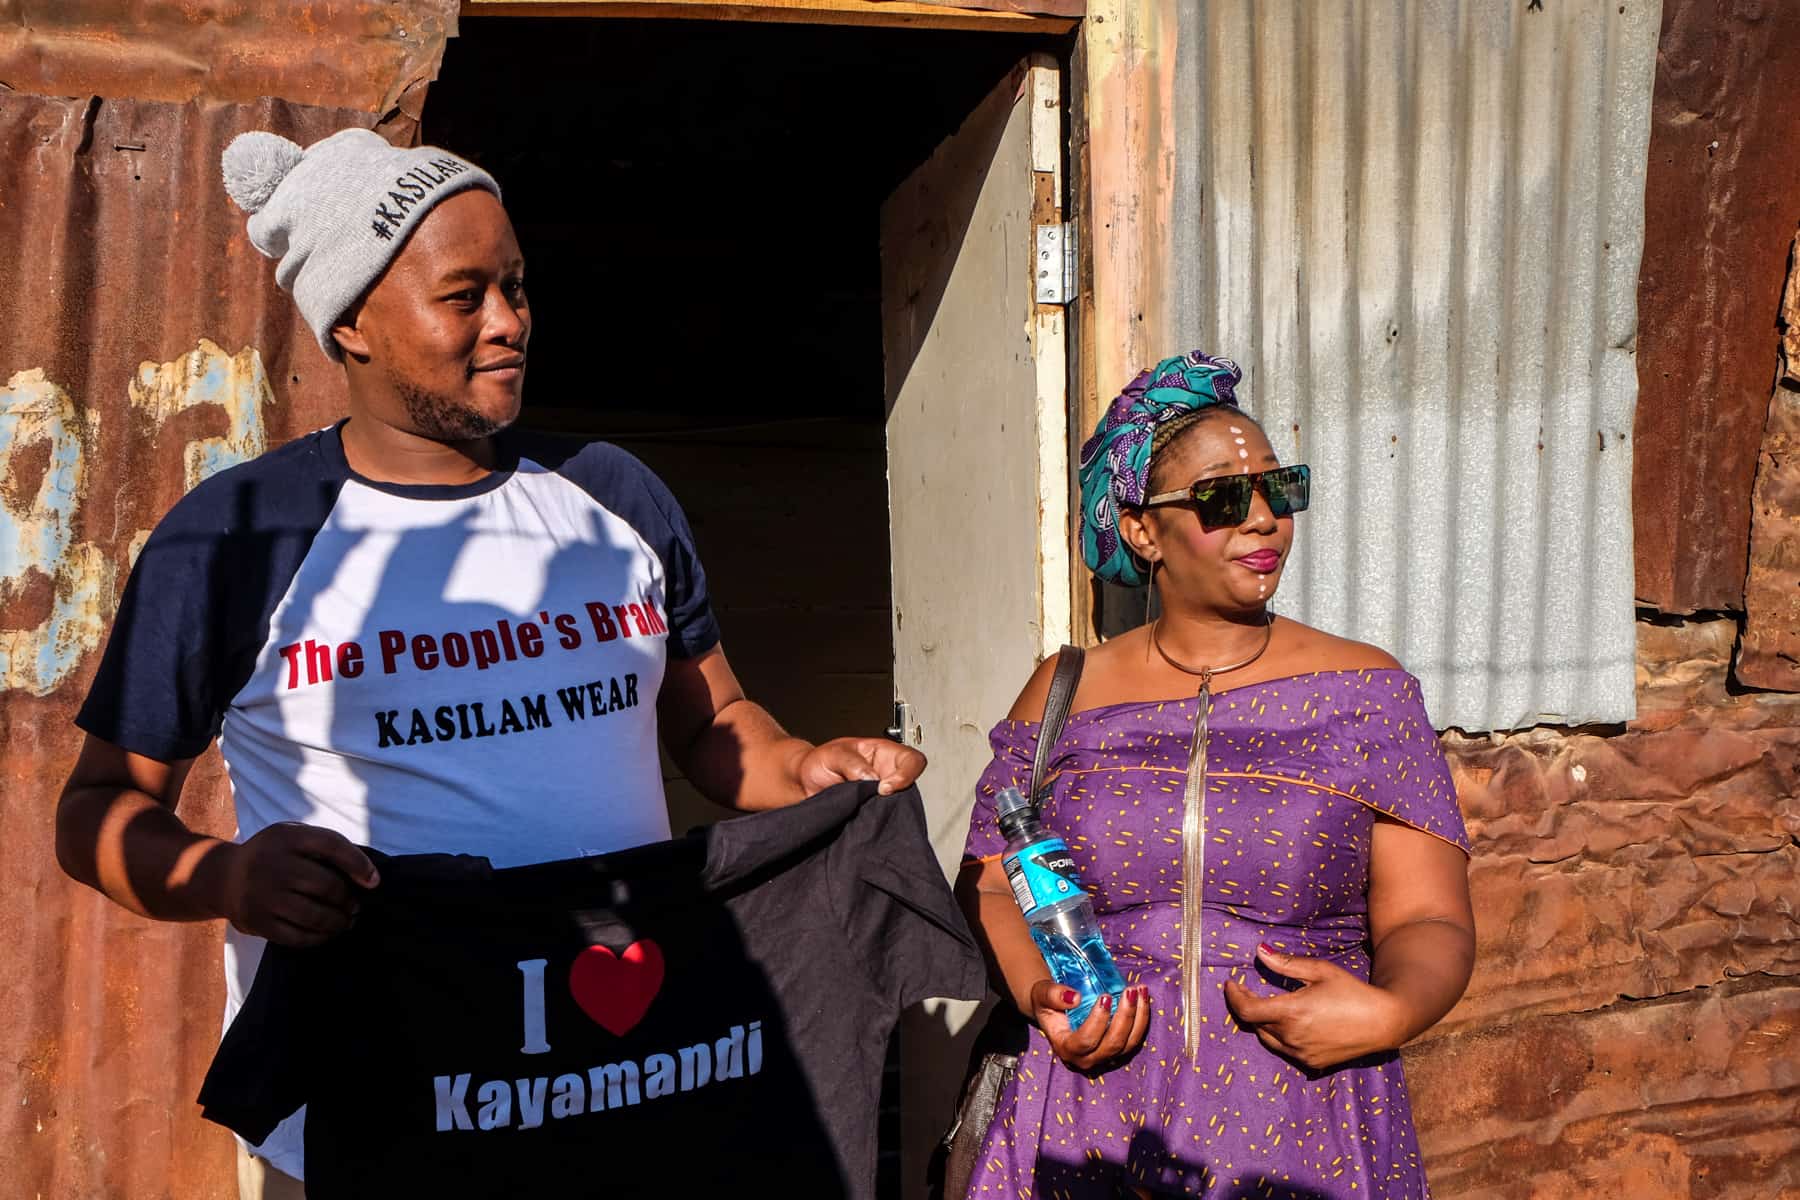 A mean wearing a grey hat holds a black t-shirt that reads 'I (heart) Kayamandi' as he stands next to a woman in a purple dress outside of a clay mud and tin shack house